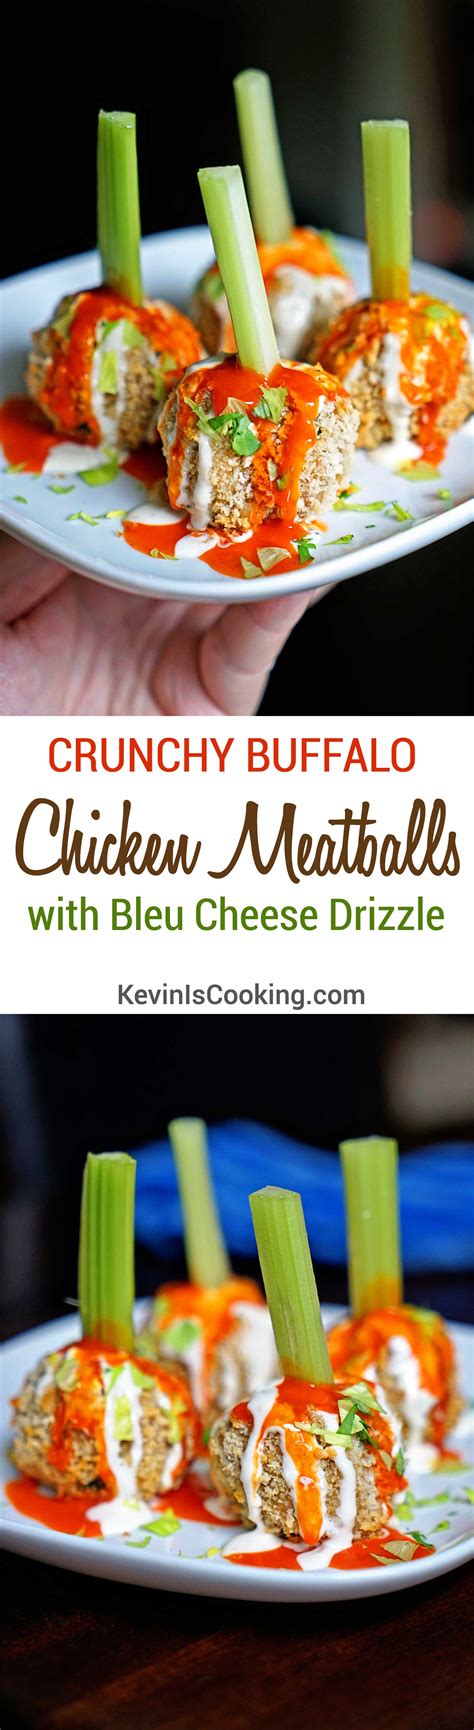 Crunchy Buffalo Chicken Meatballs With Bleu Cheese Drizzle And Hot